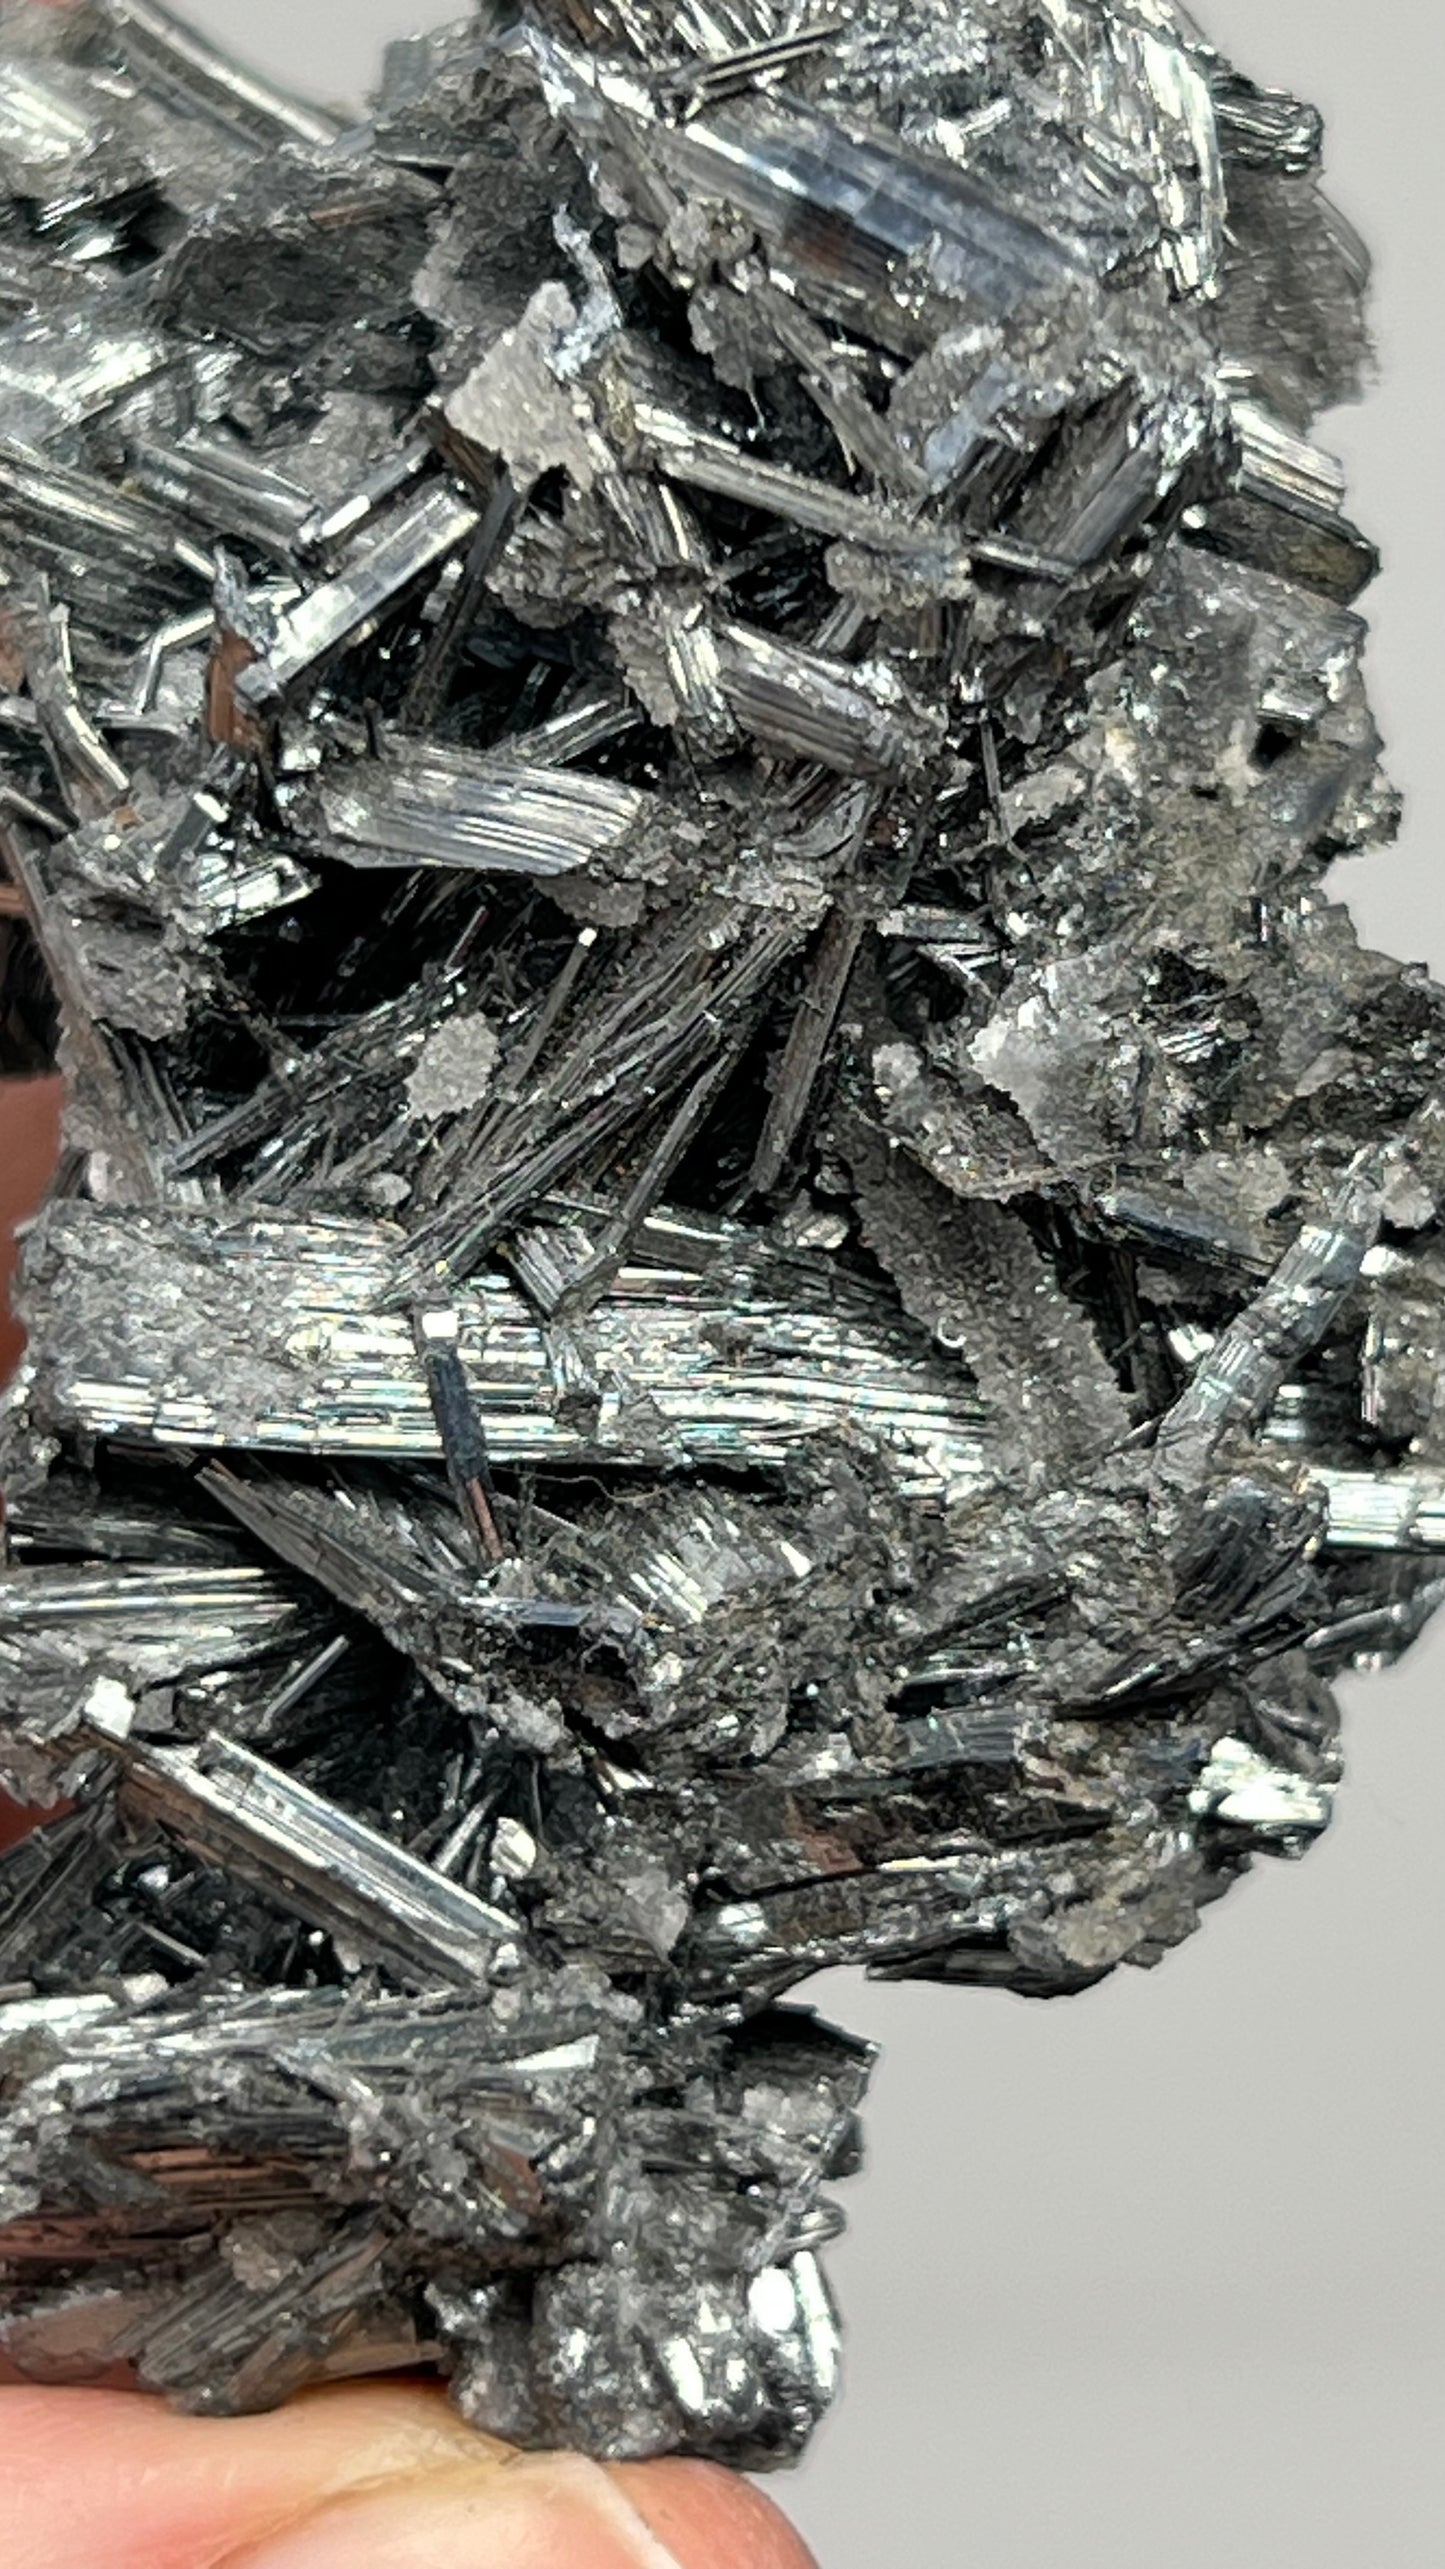 Prismatic Stibnite Cluster with Chalcedony Druse